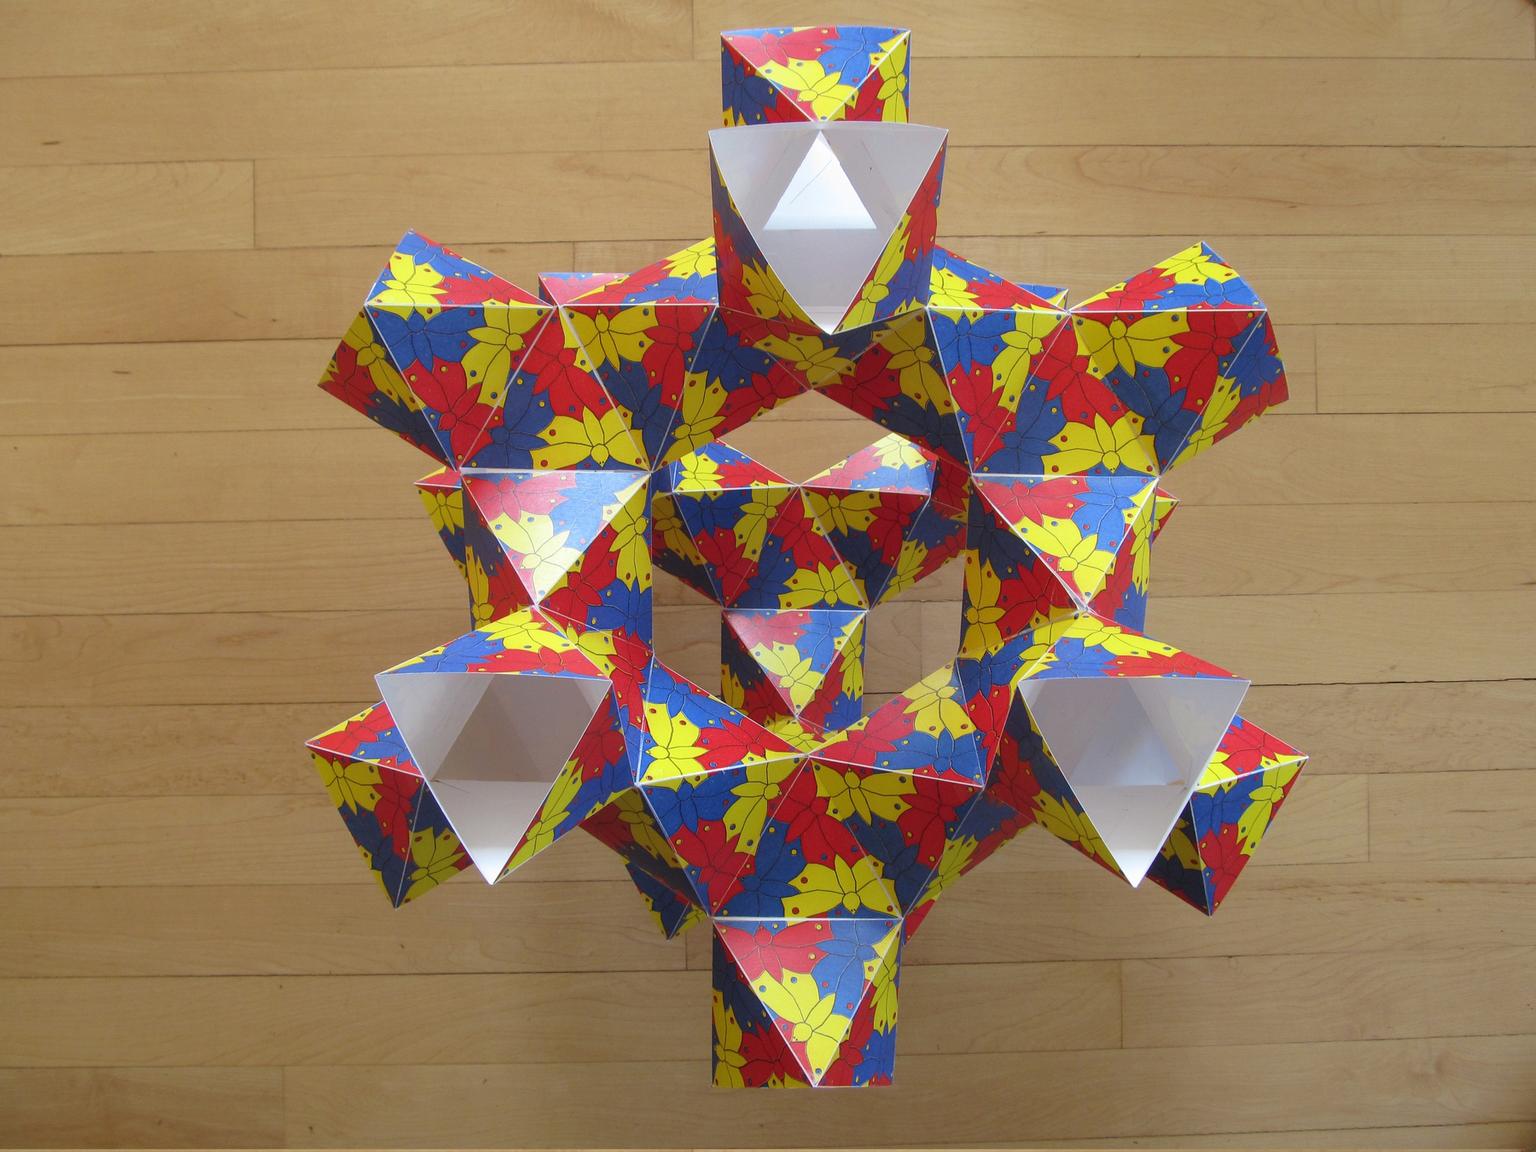 Image for entry 'A {3,8} D-Polyhedron with Butterflies'